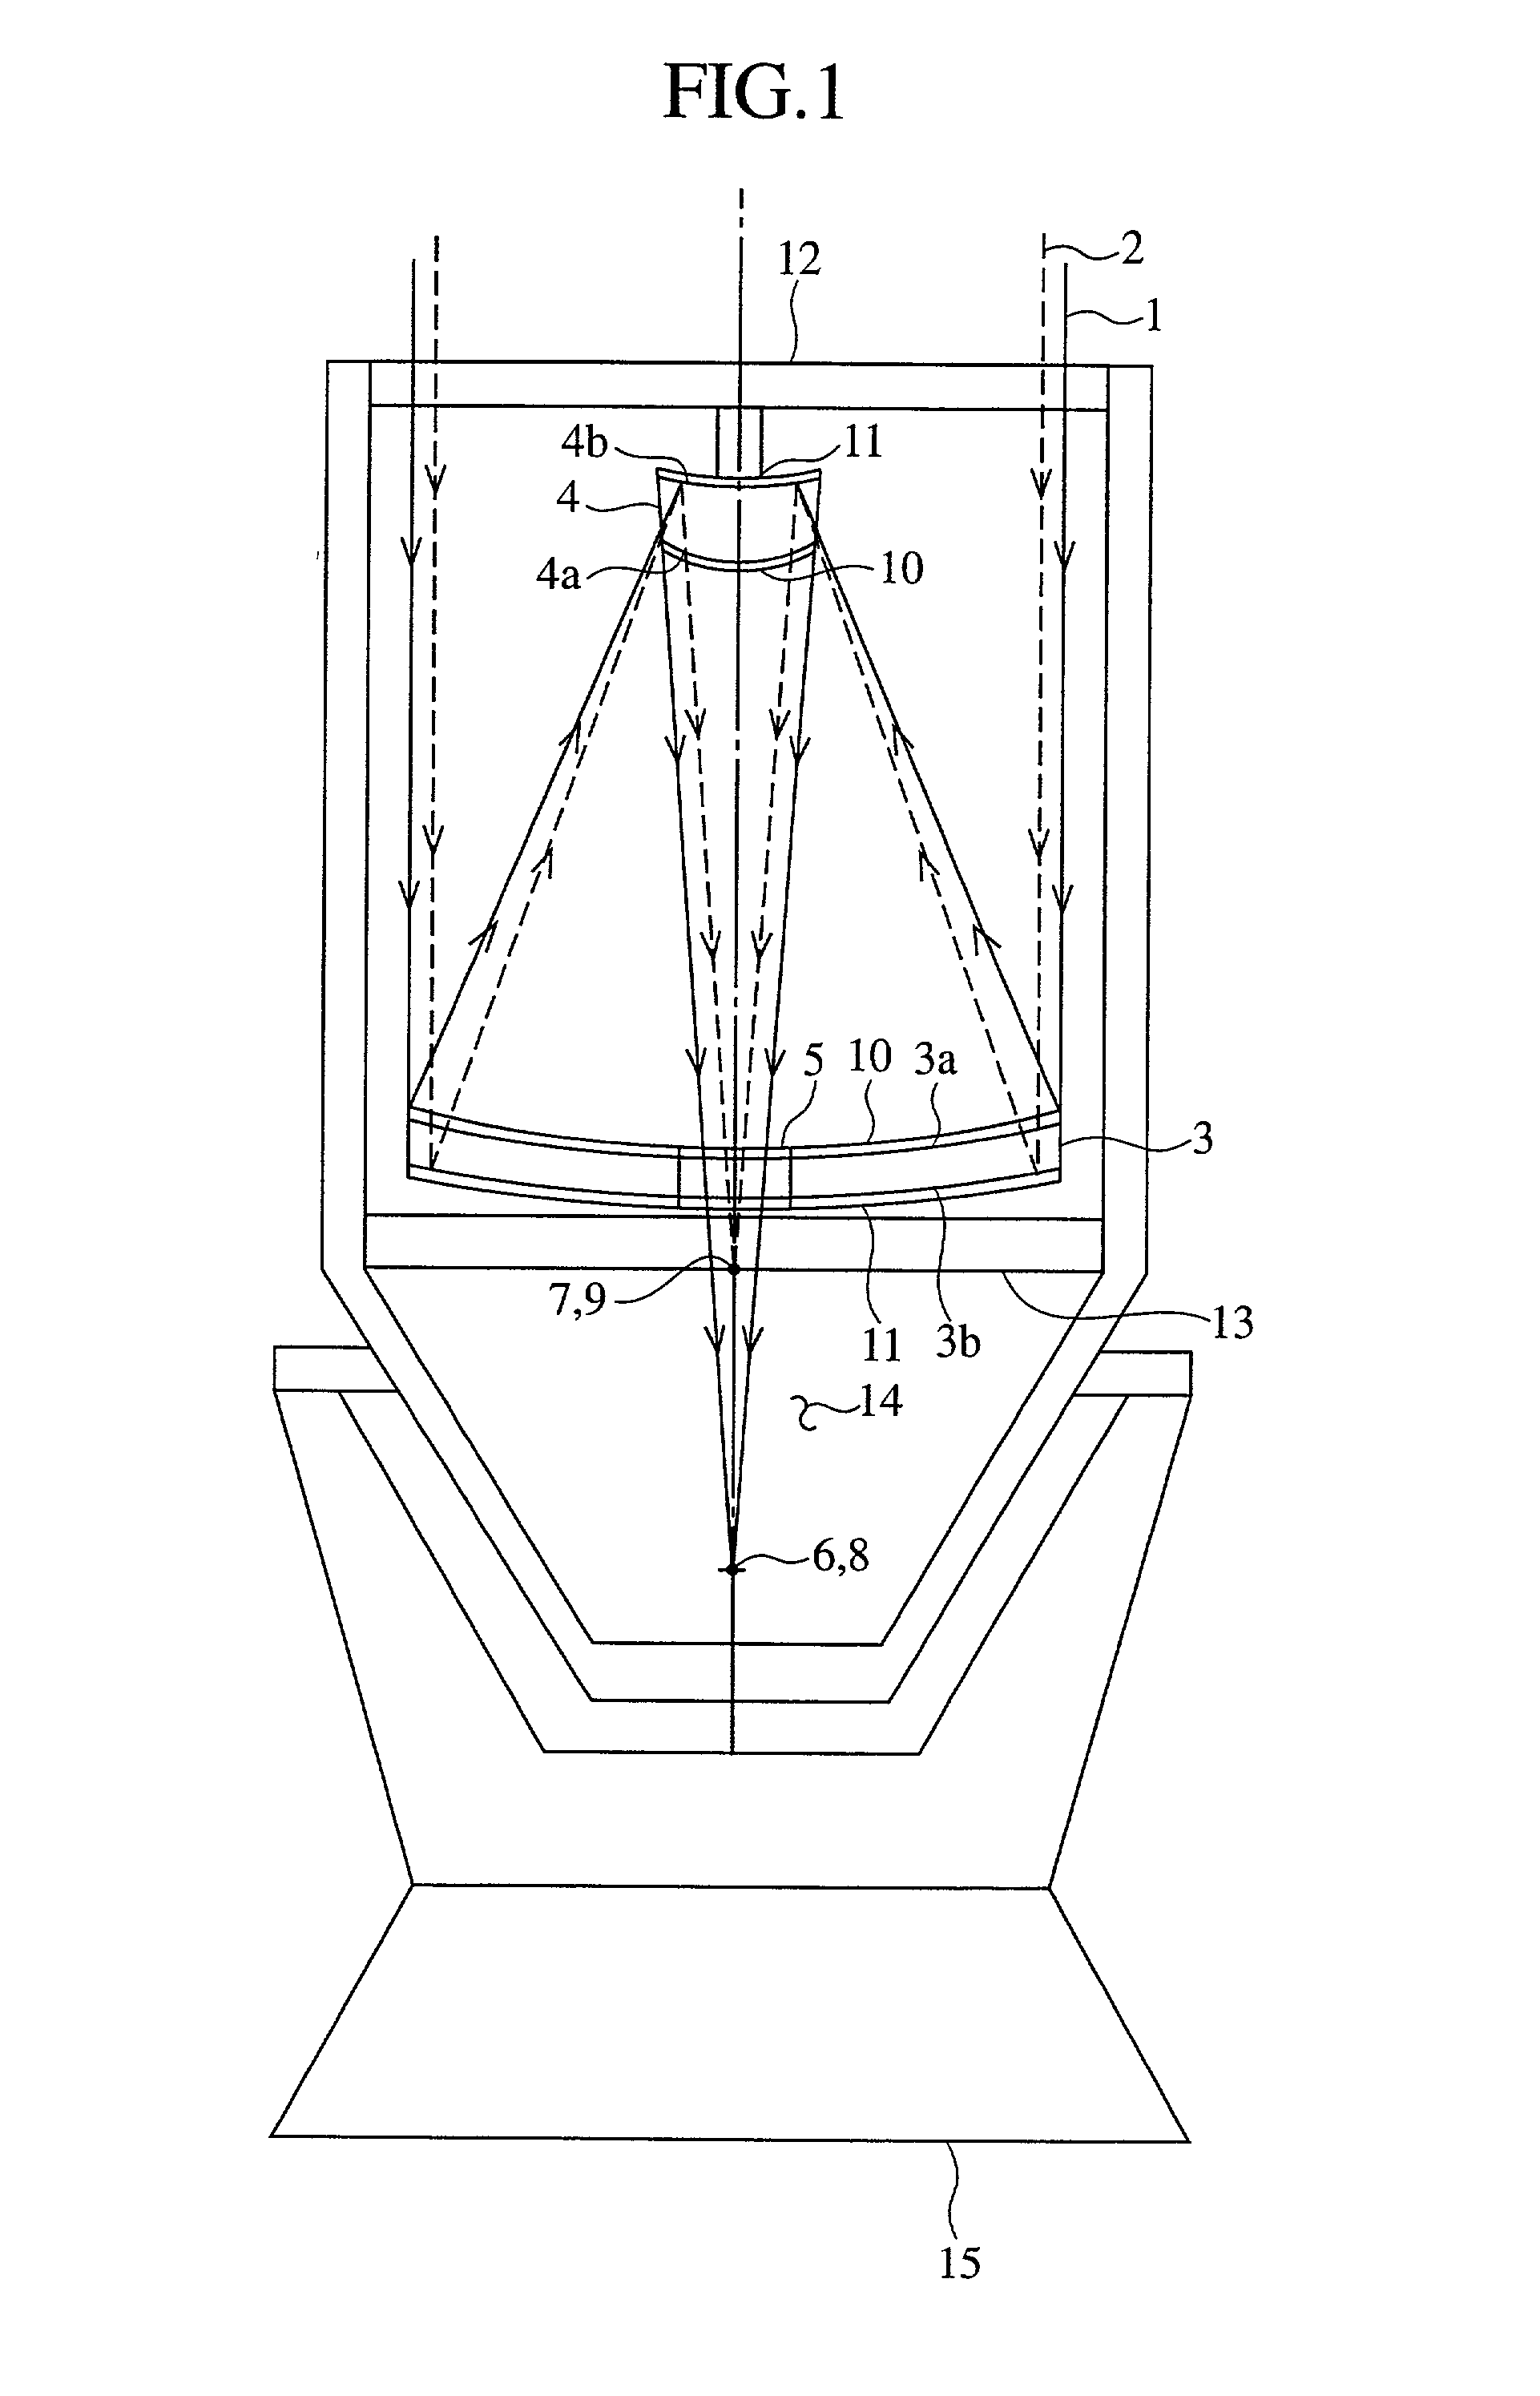 Multi-frequency telescope apparatus for celestial observations using reflecting telescope